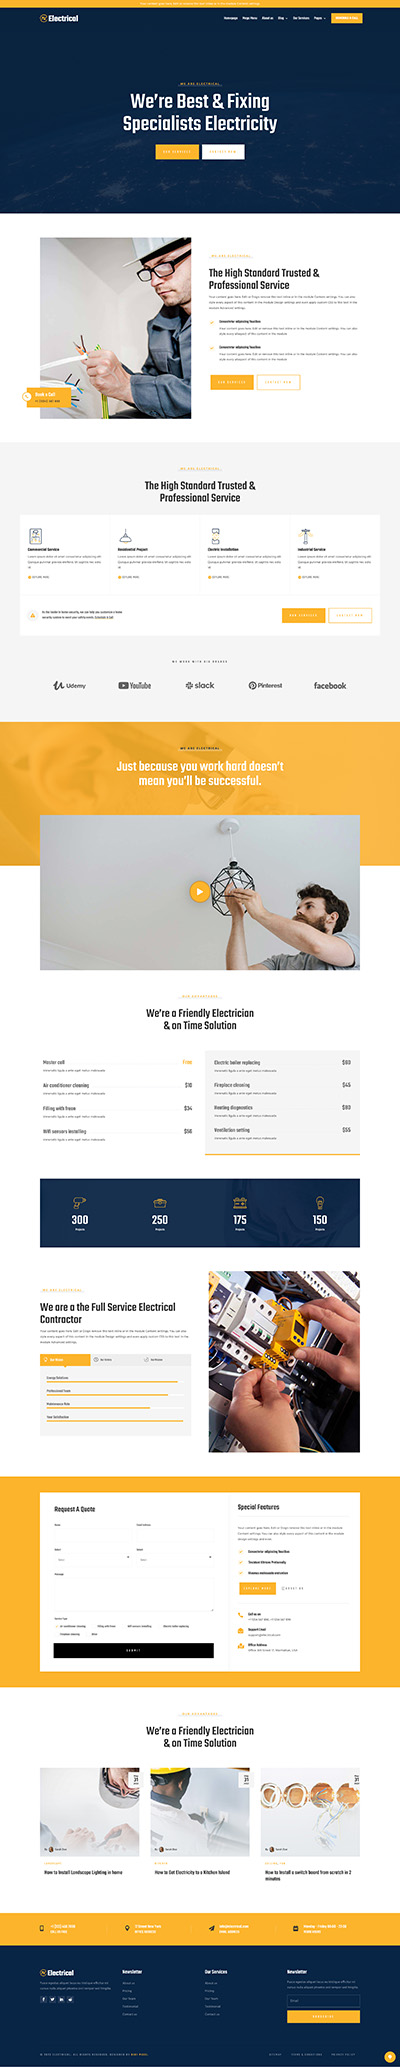 Marketing Layout Pack Homepage